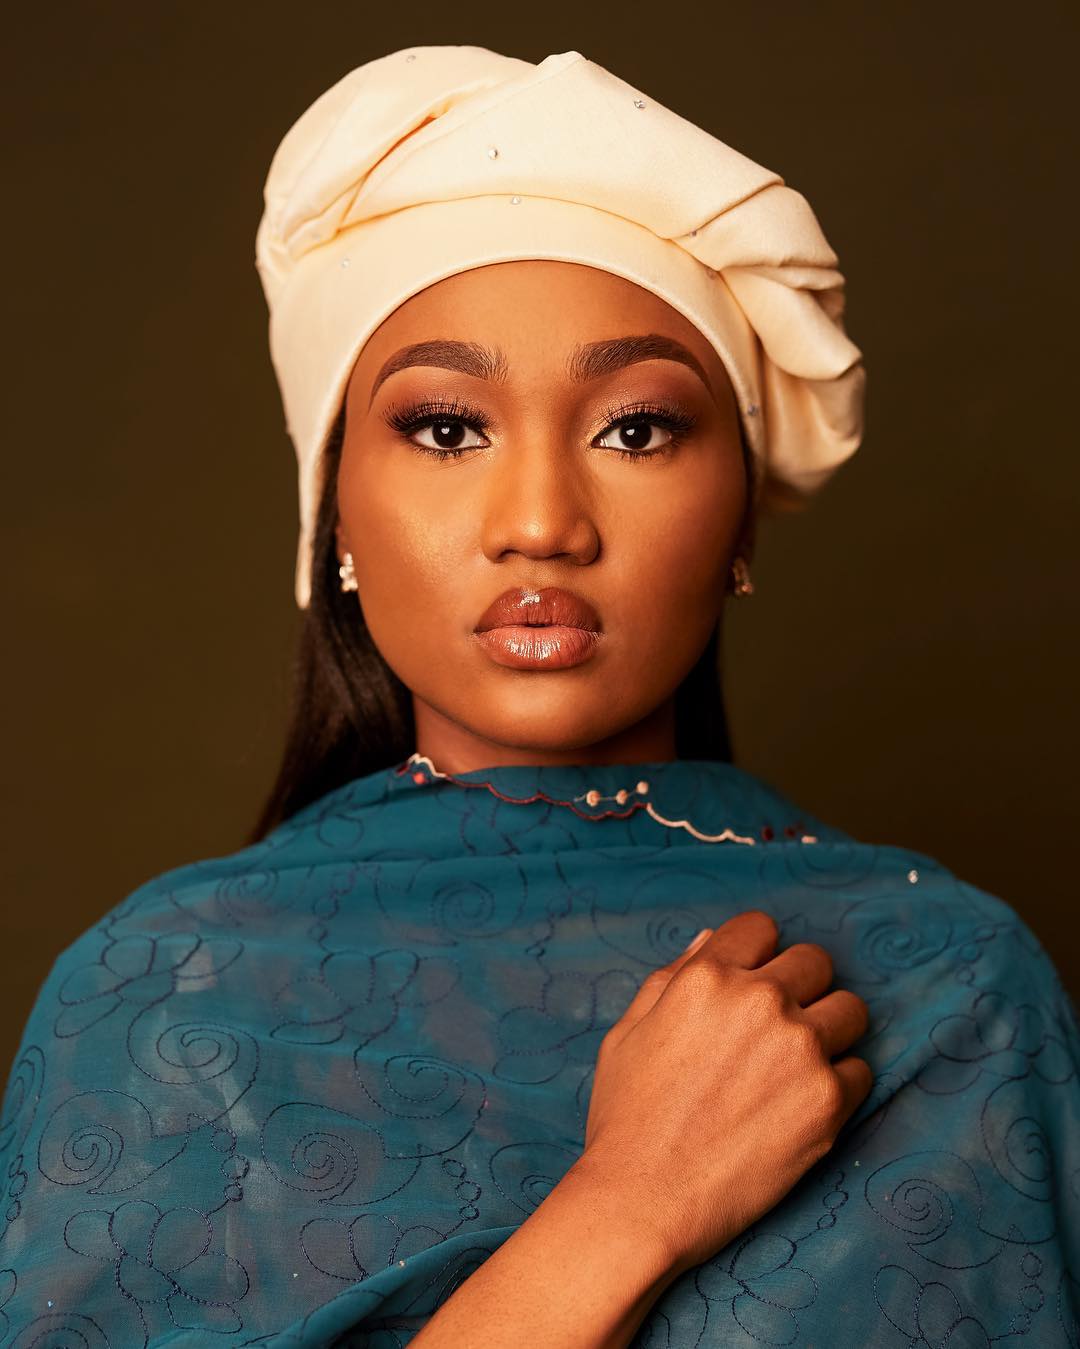 The smile, class and carriage - 5 photos of Zahra Buhari and Chioma Avril to prove they look like sisters